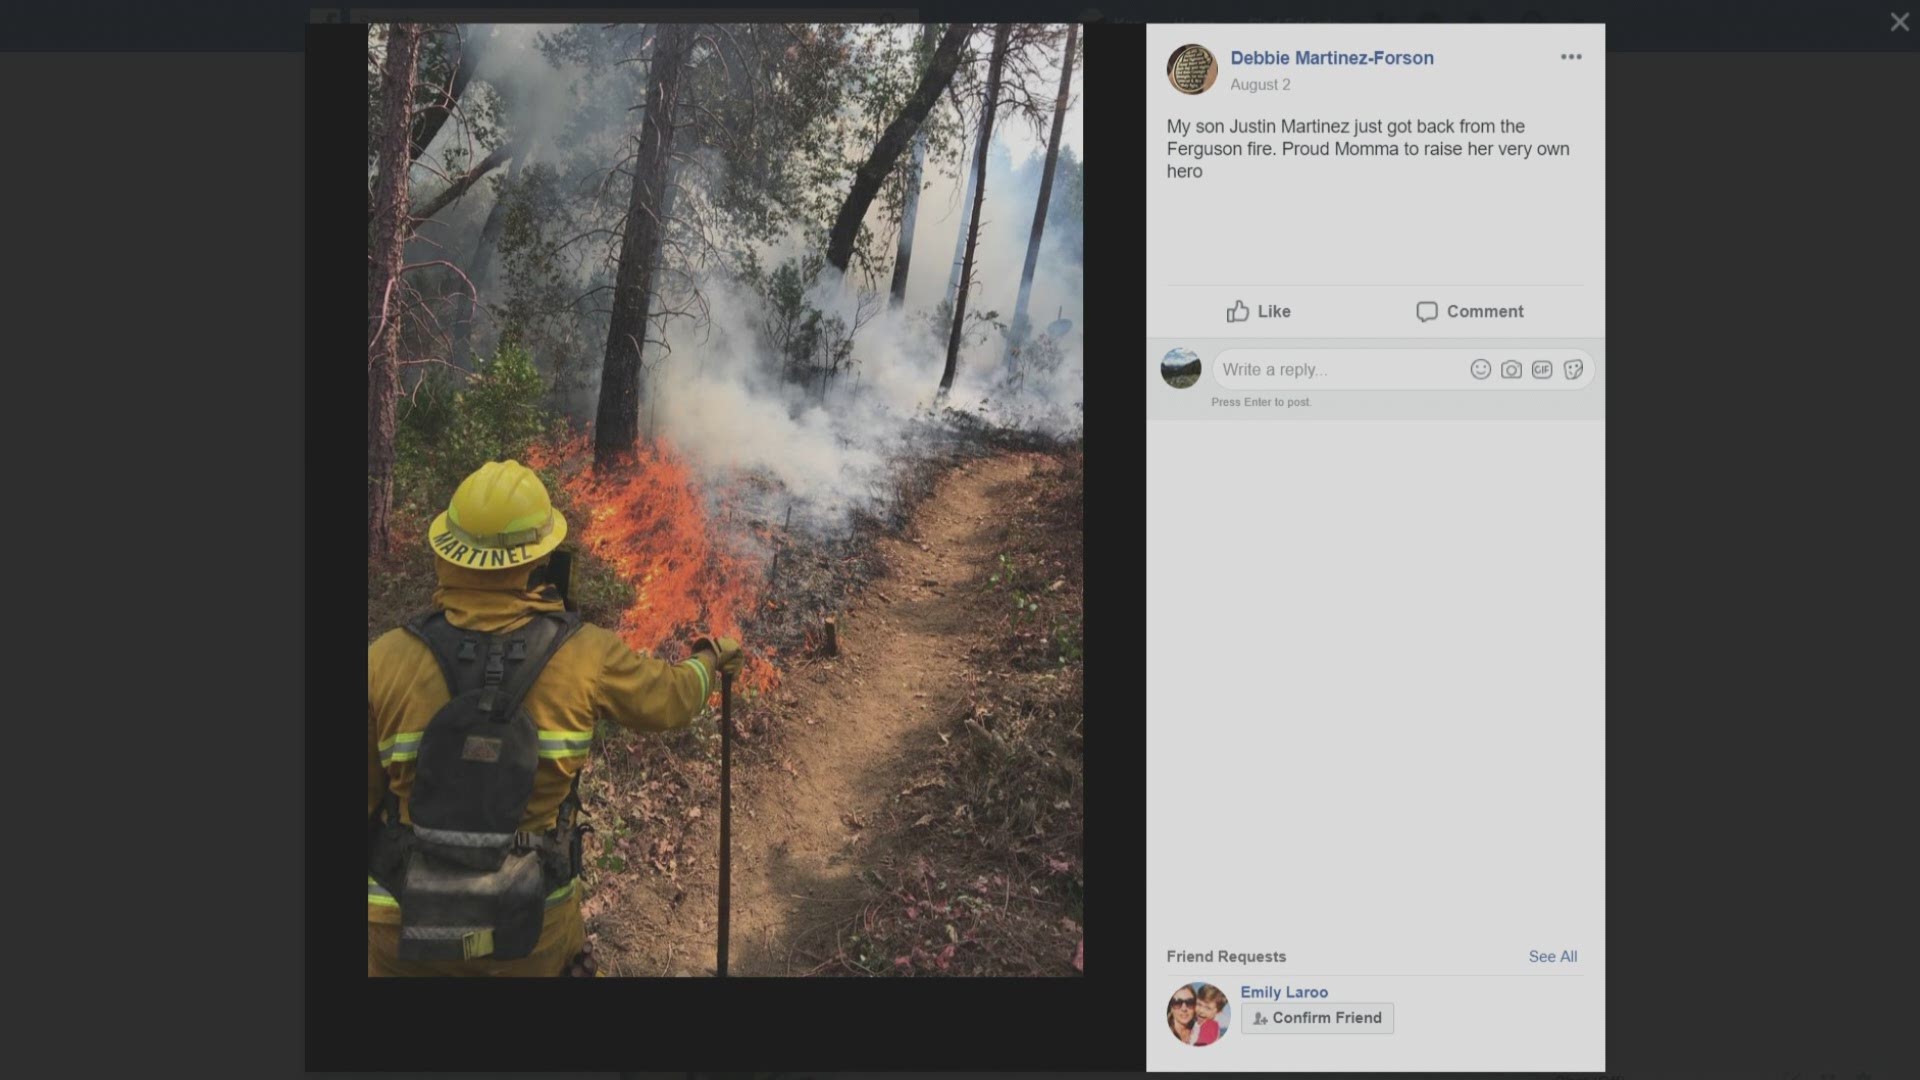 Join ABC10 in thanking all of the firefighters who are putting their lives on the line battling the many wildfires burning in California.